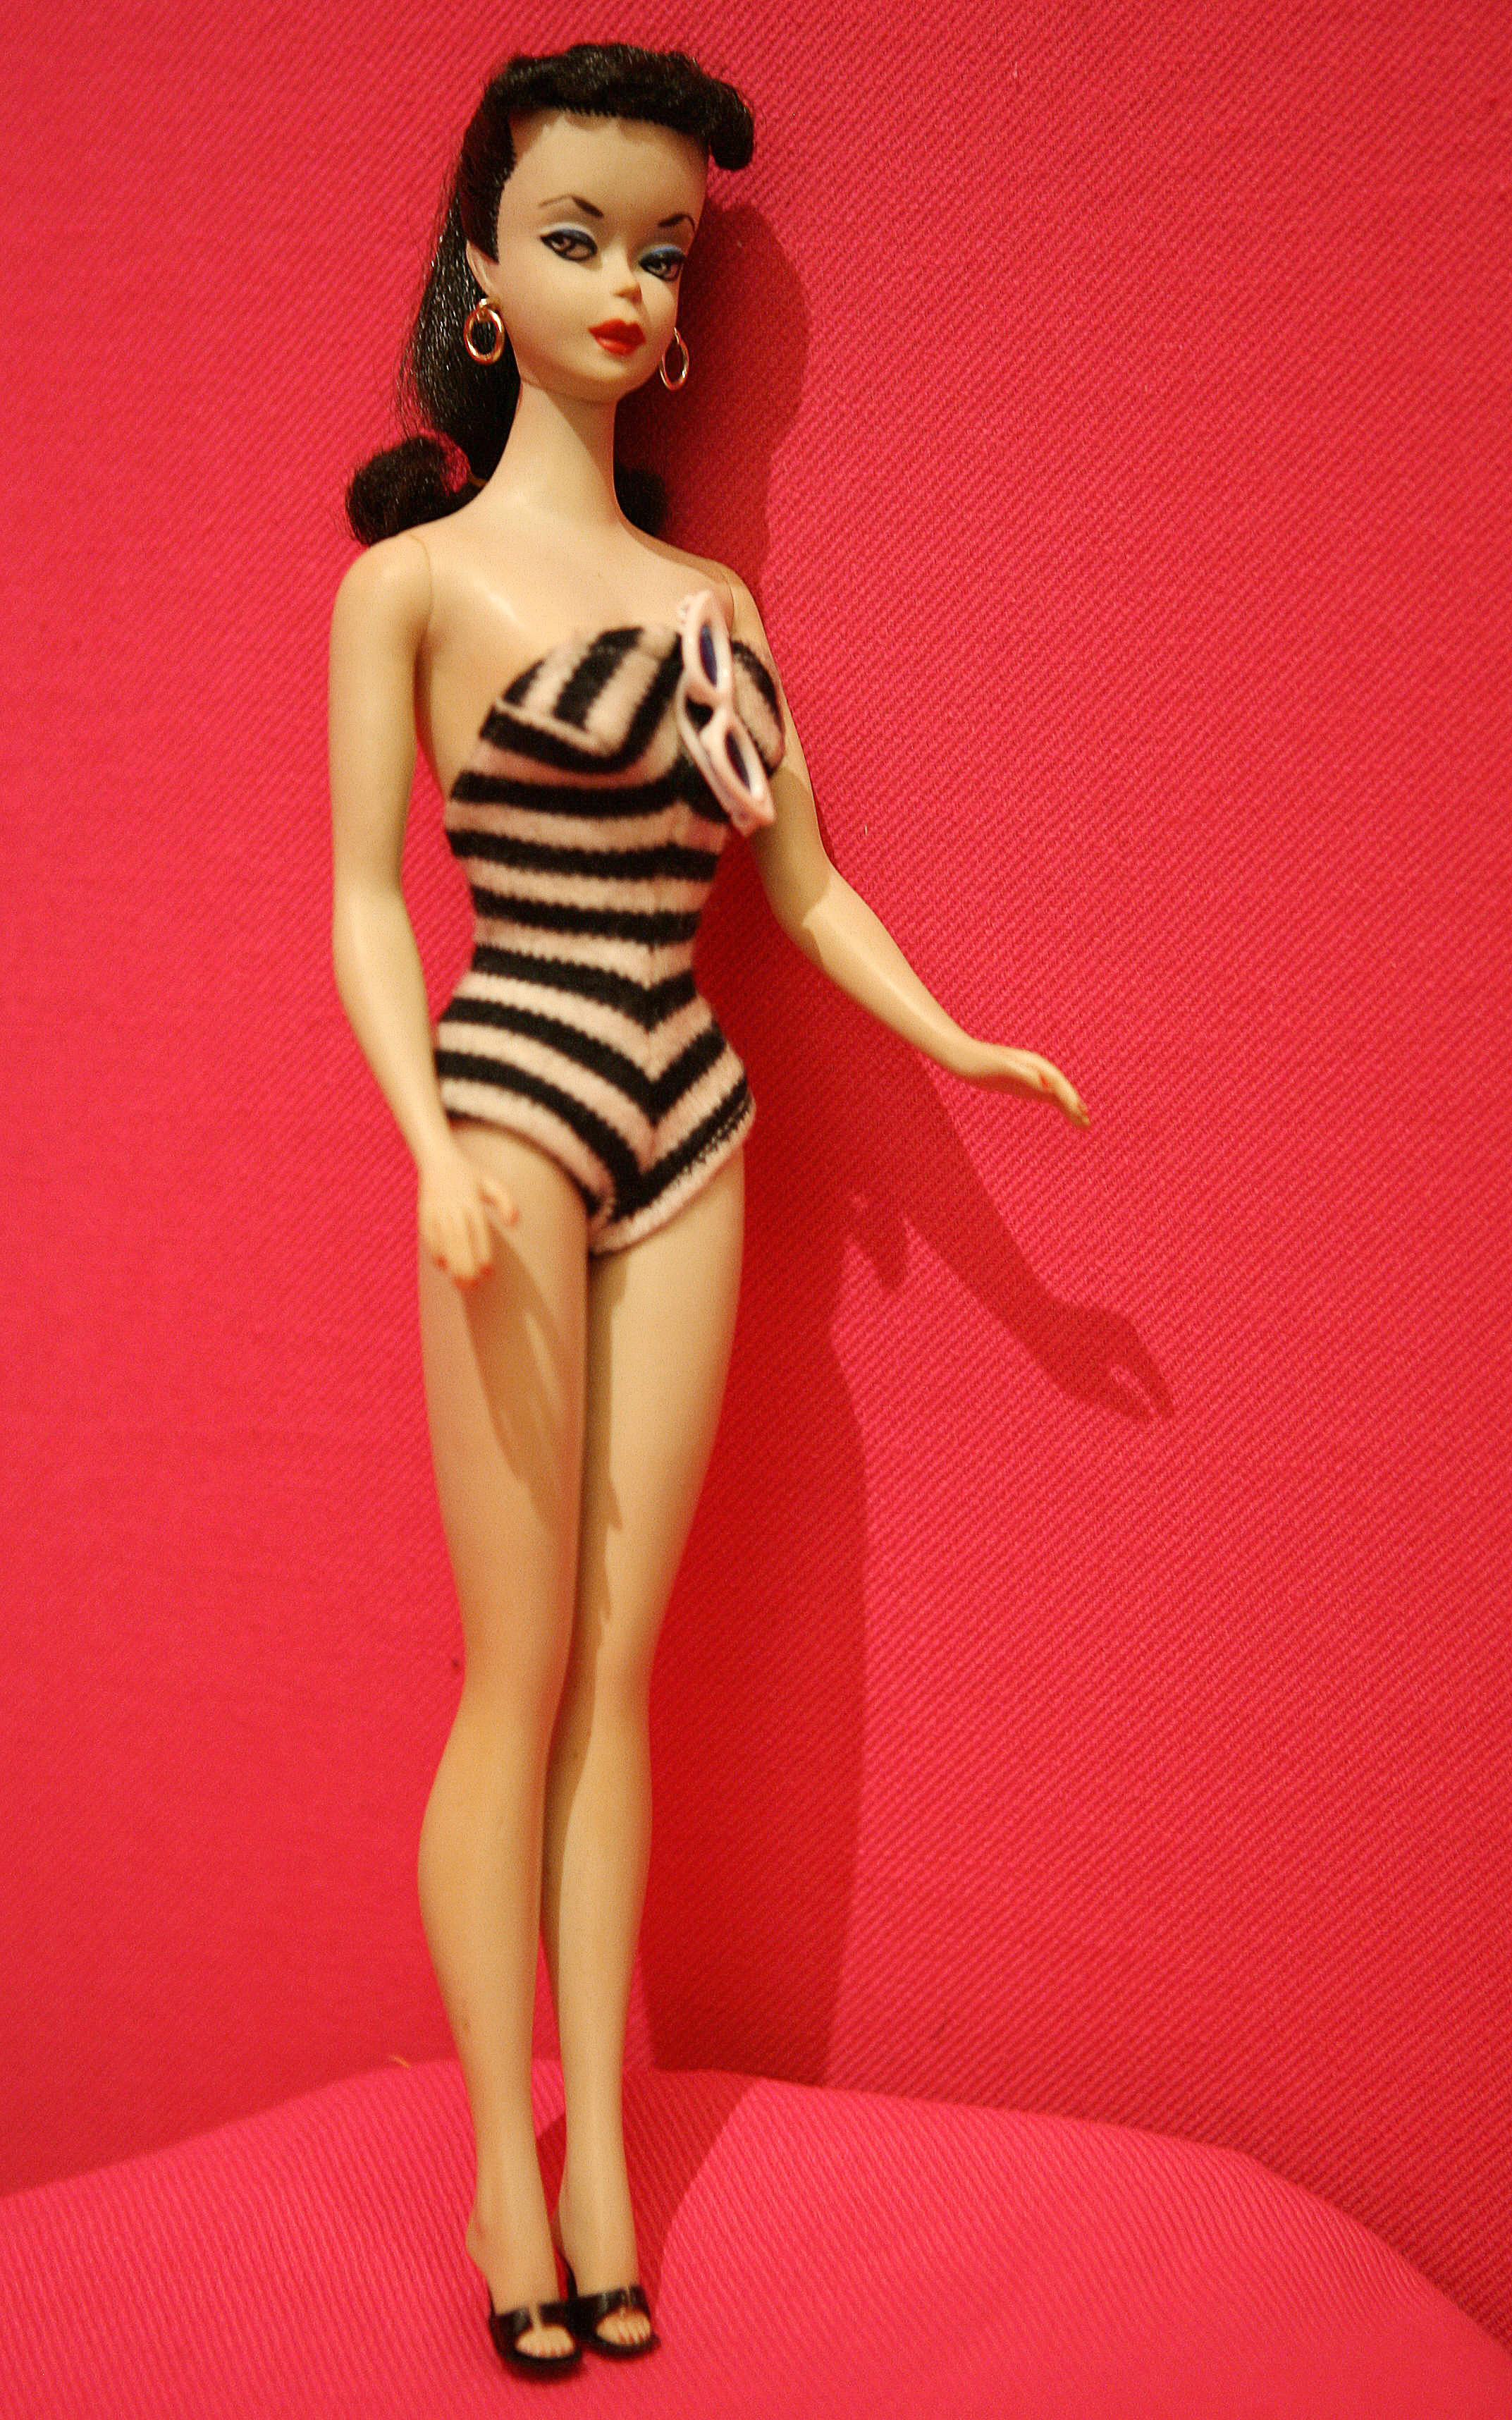 These 5 Barbie Doll Controversies Will Blow Your Mind